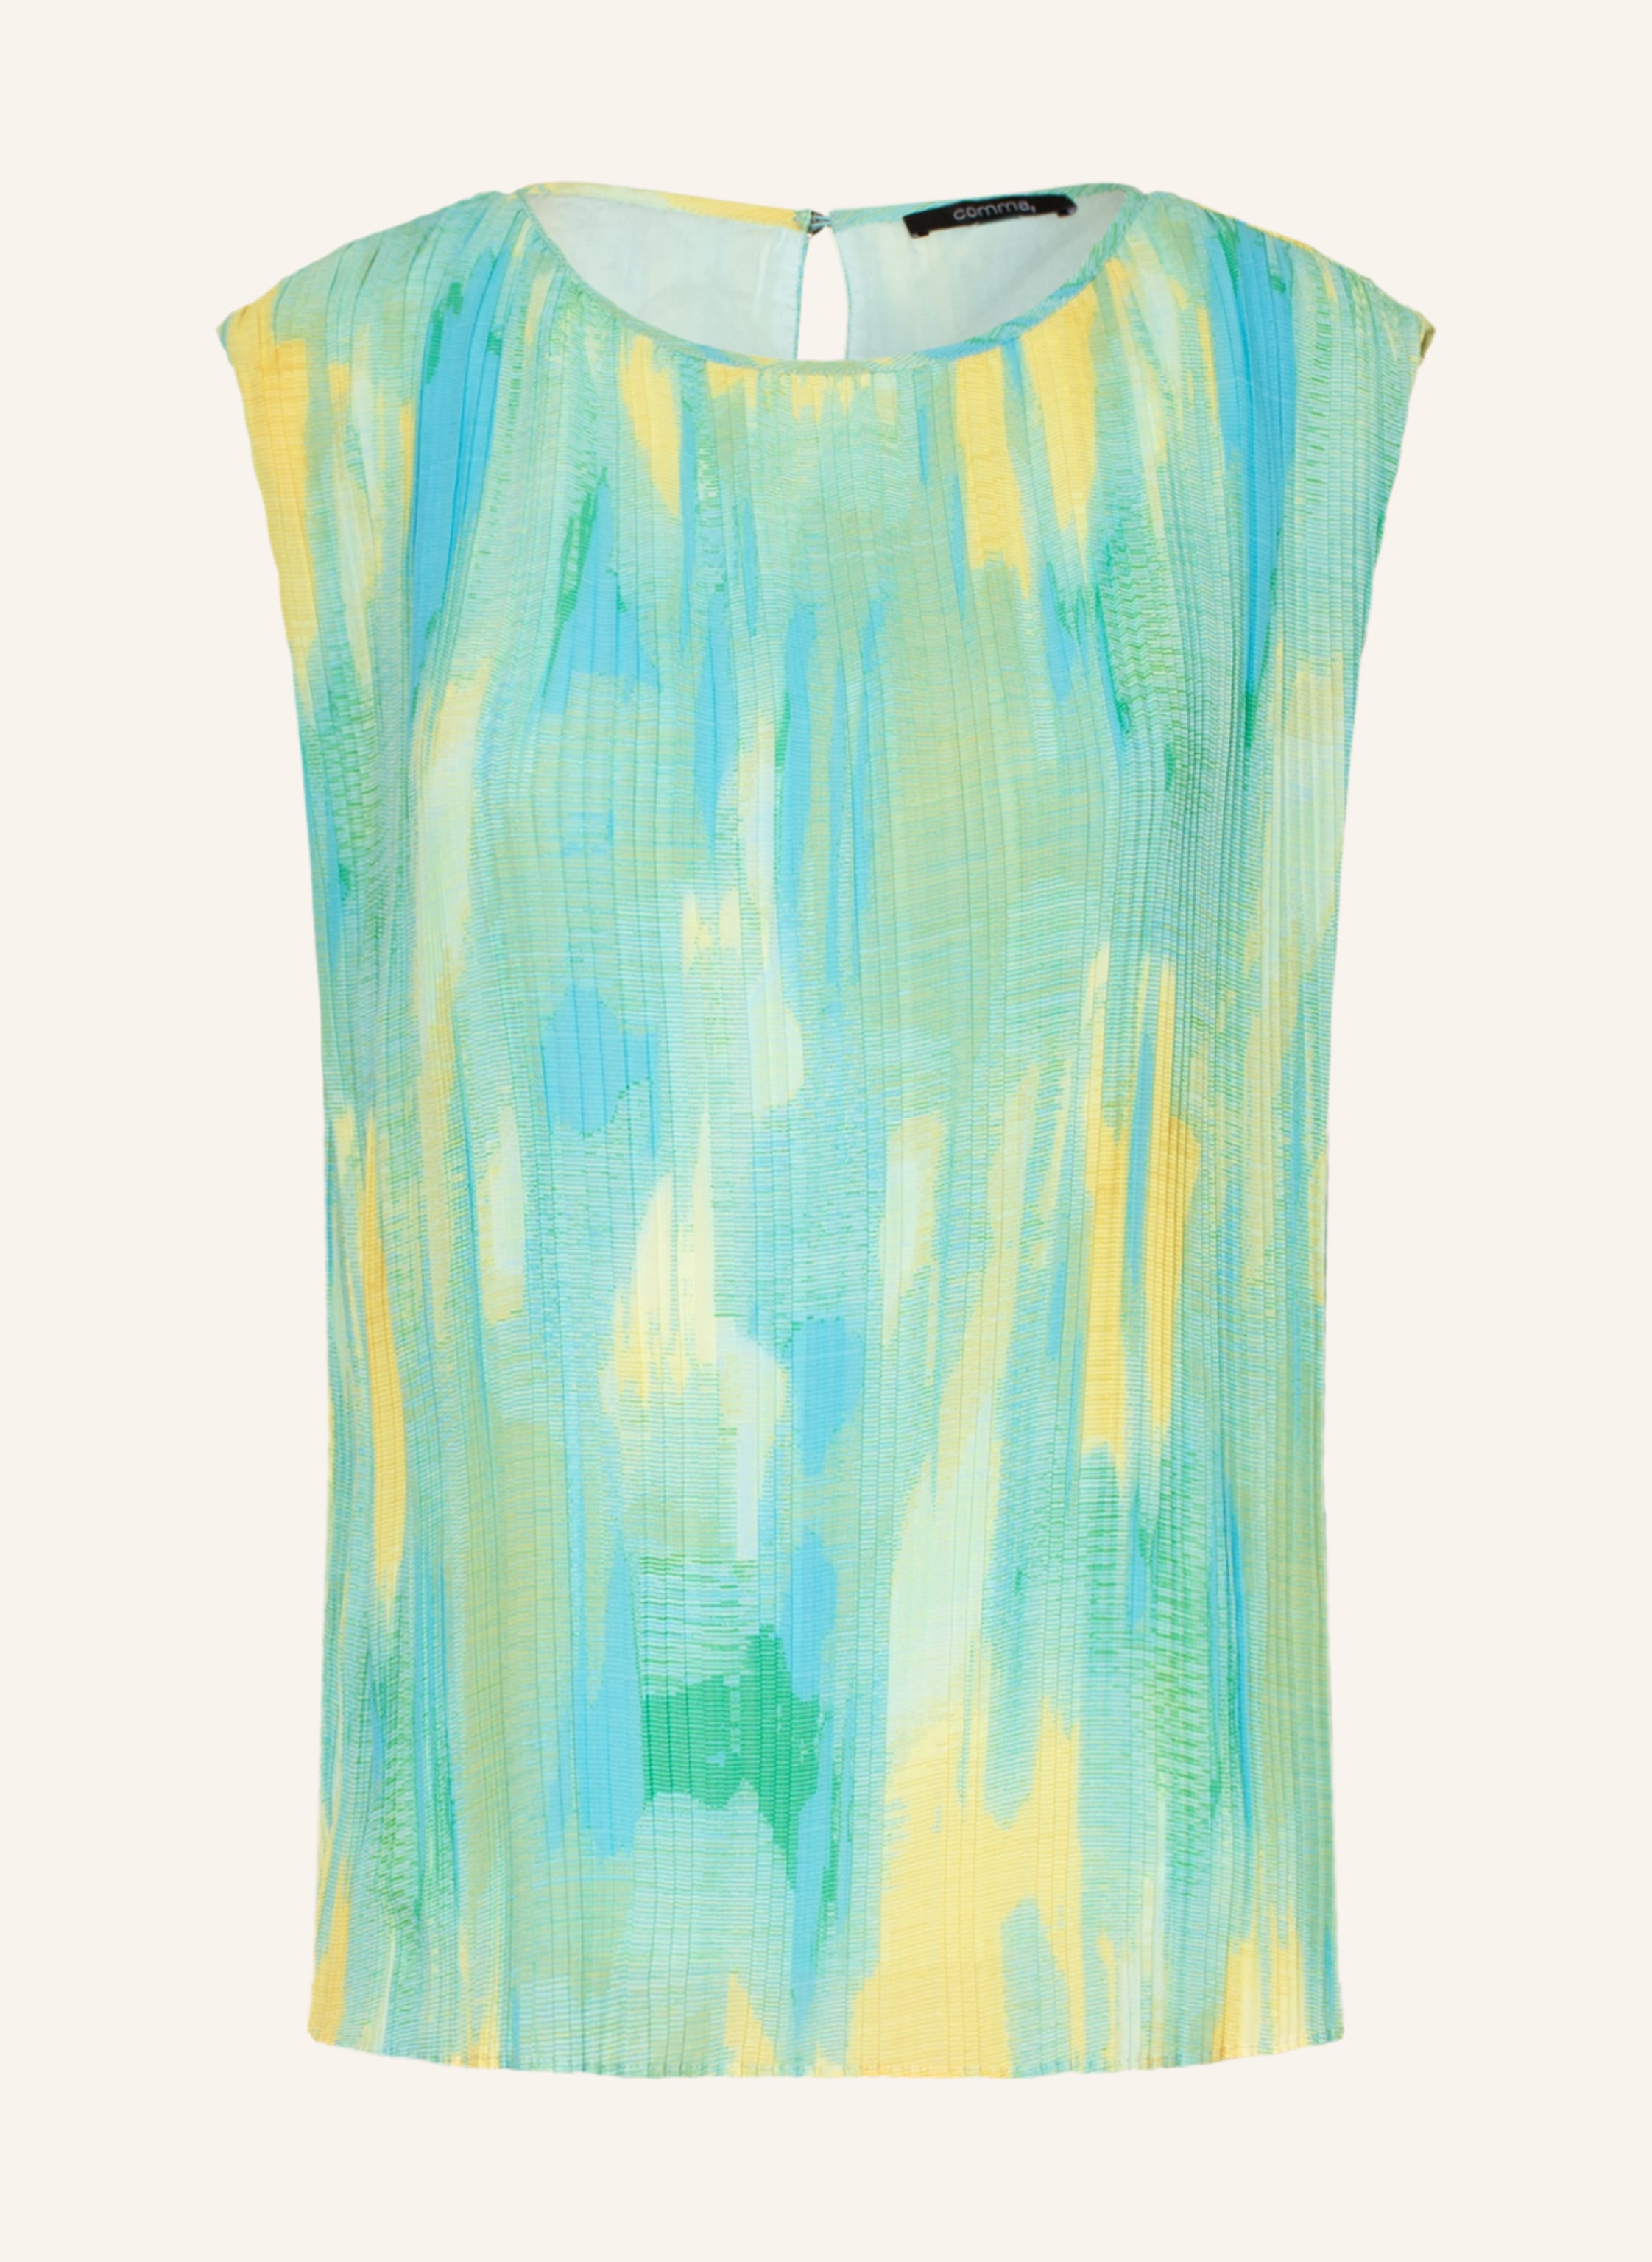 comma Pleated top in light green/ turquoise/ yellow